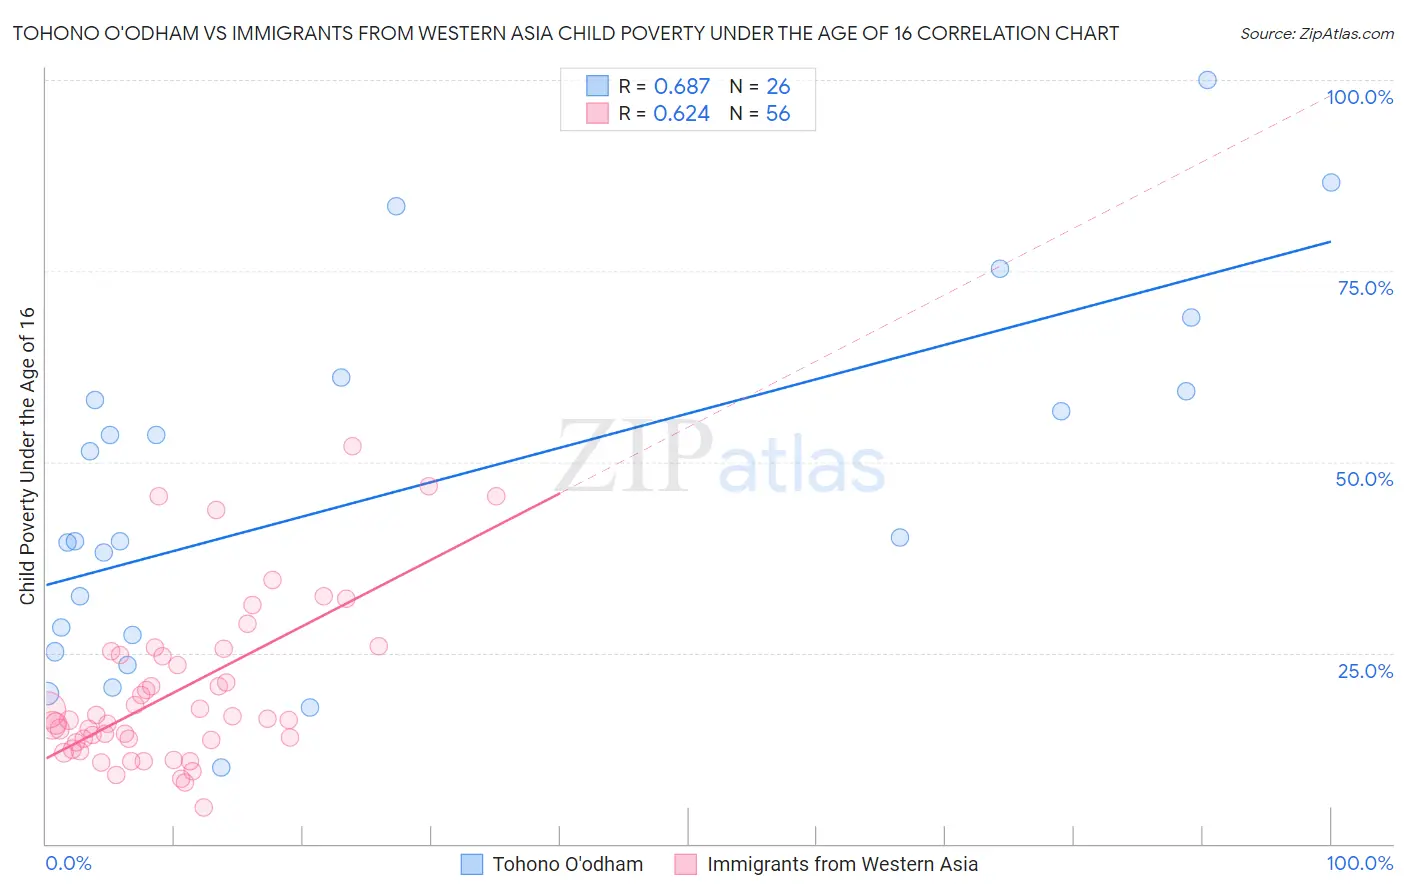 Tohono O'odham vs Immigrants from Western Asia Child Poverty Under the Age of 16